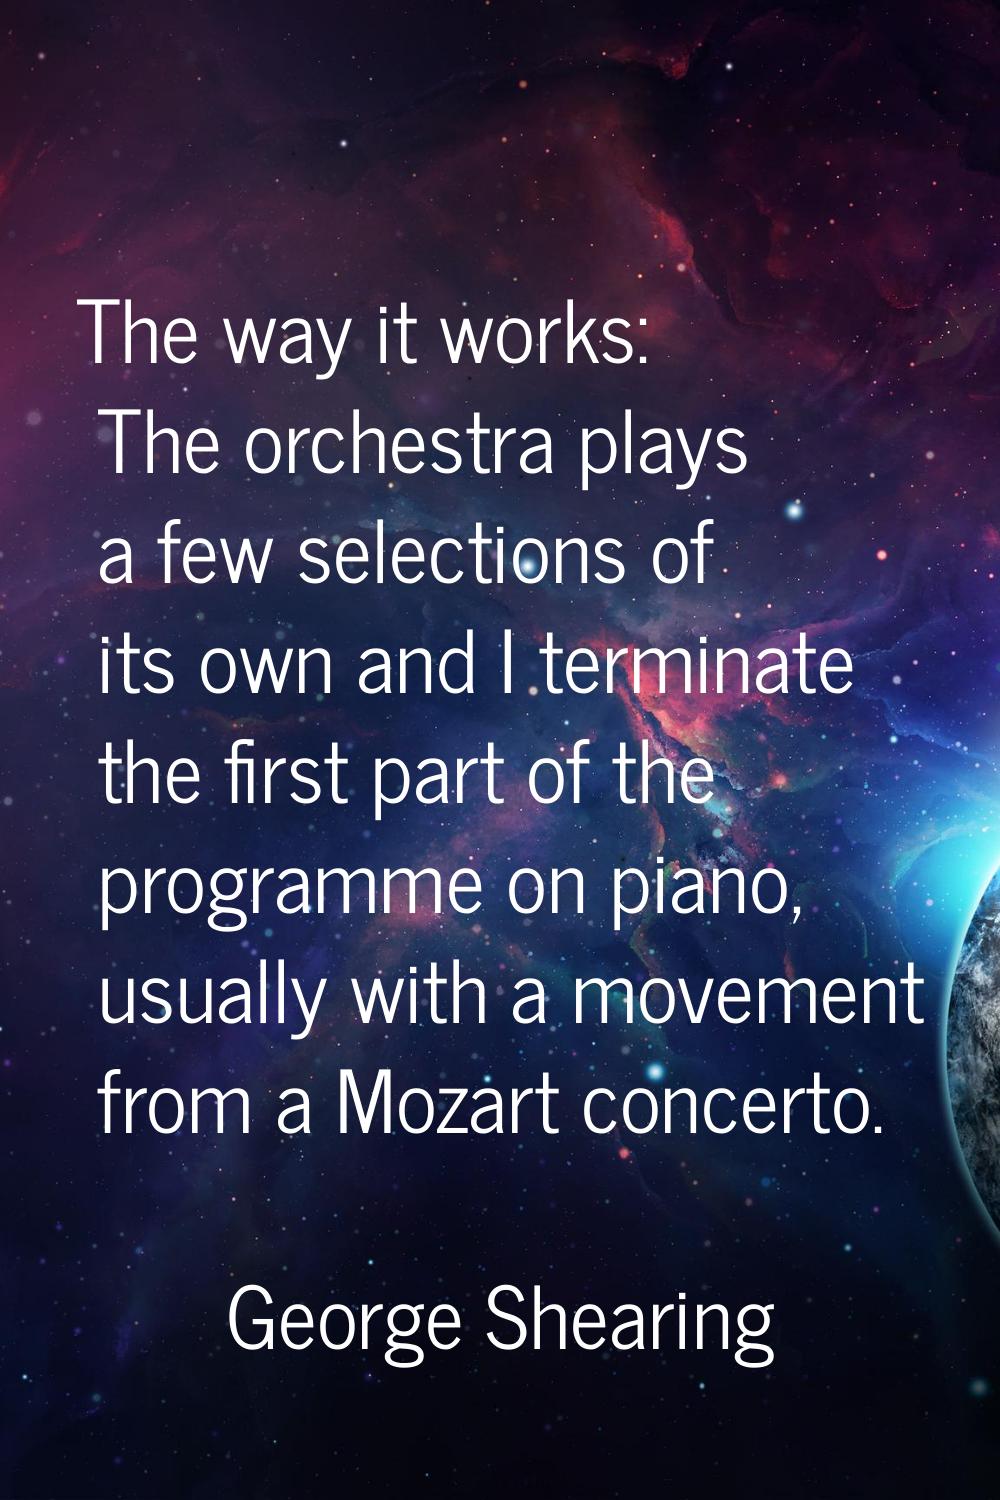 The way it works: The orchestra plays a few selections of its own and I terminate the first part of